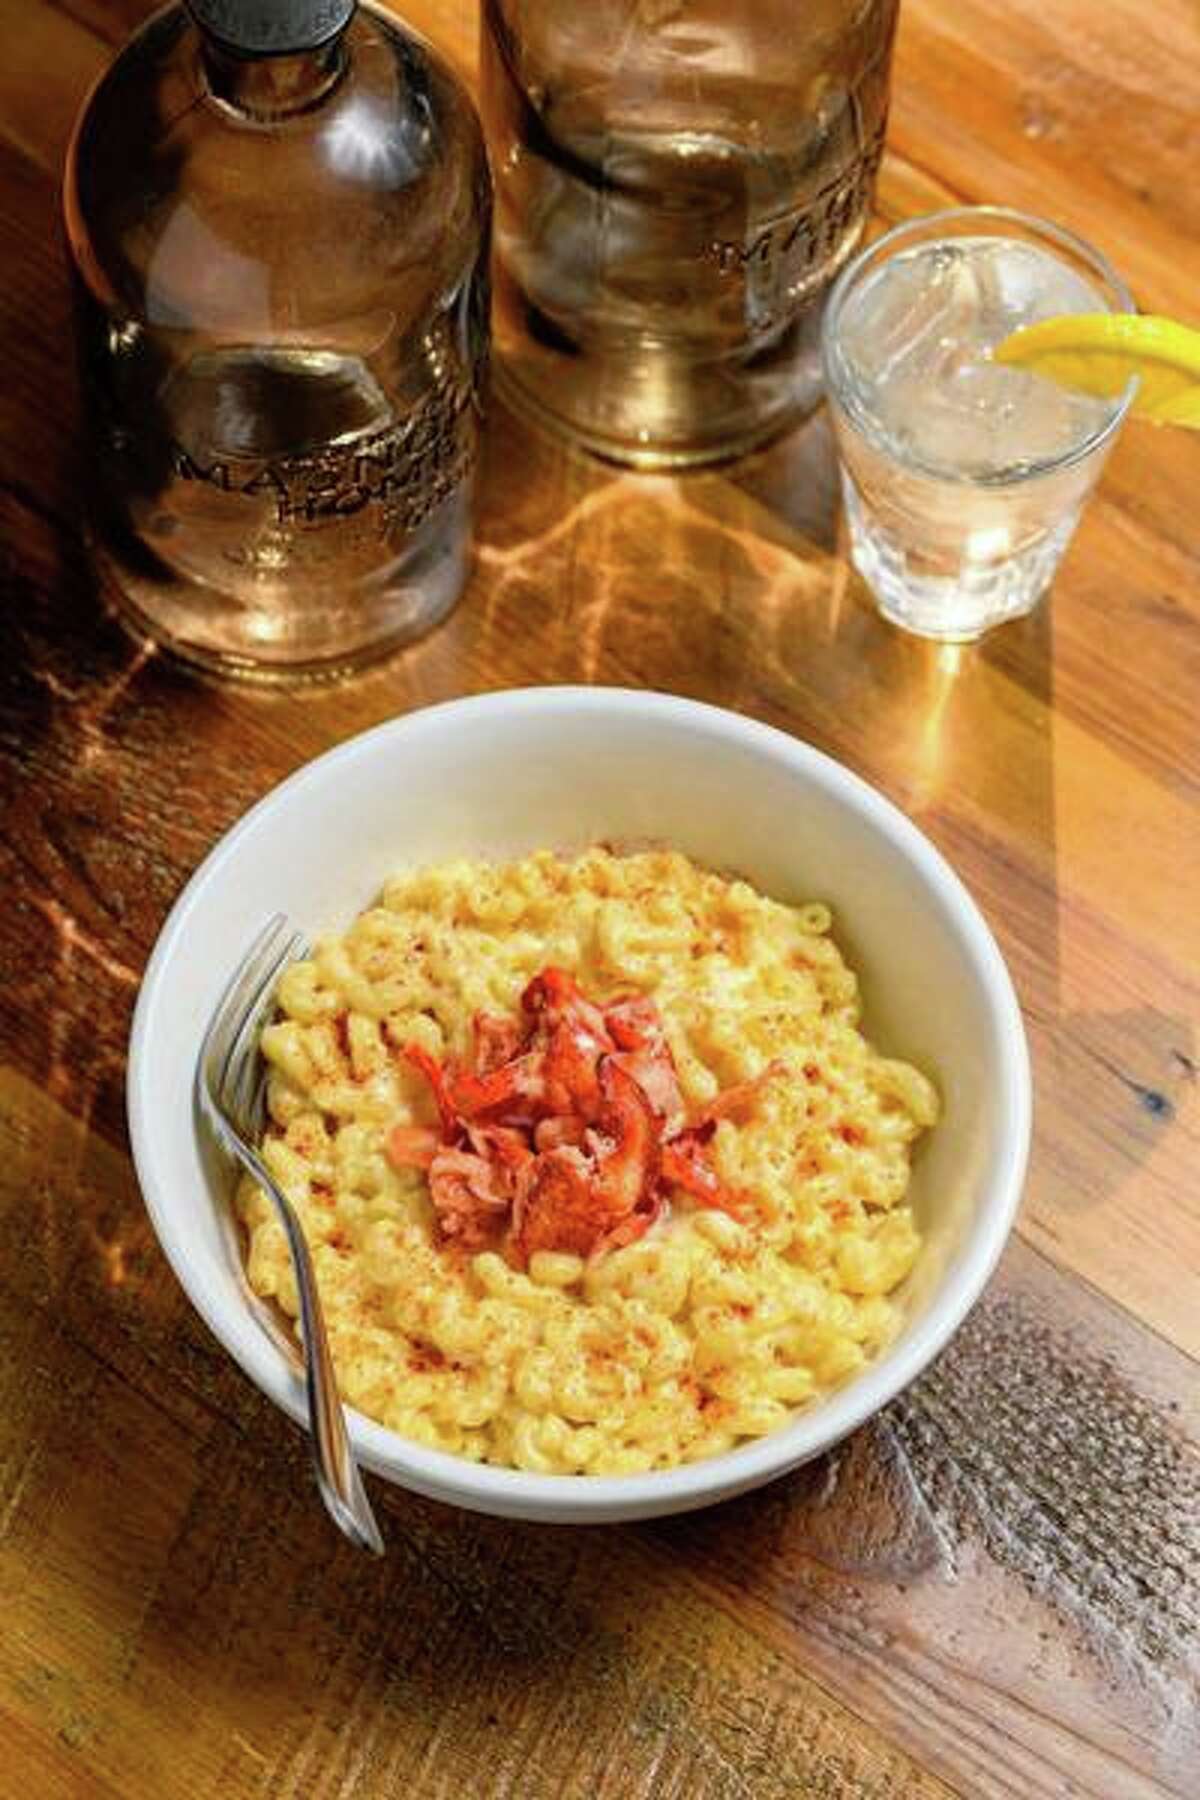 Recipe: Try your hand at making the lobster mac and cheese at home